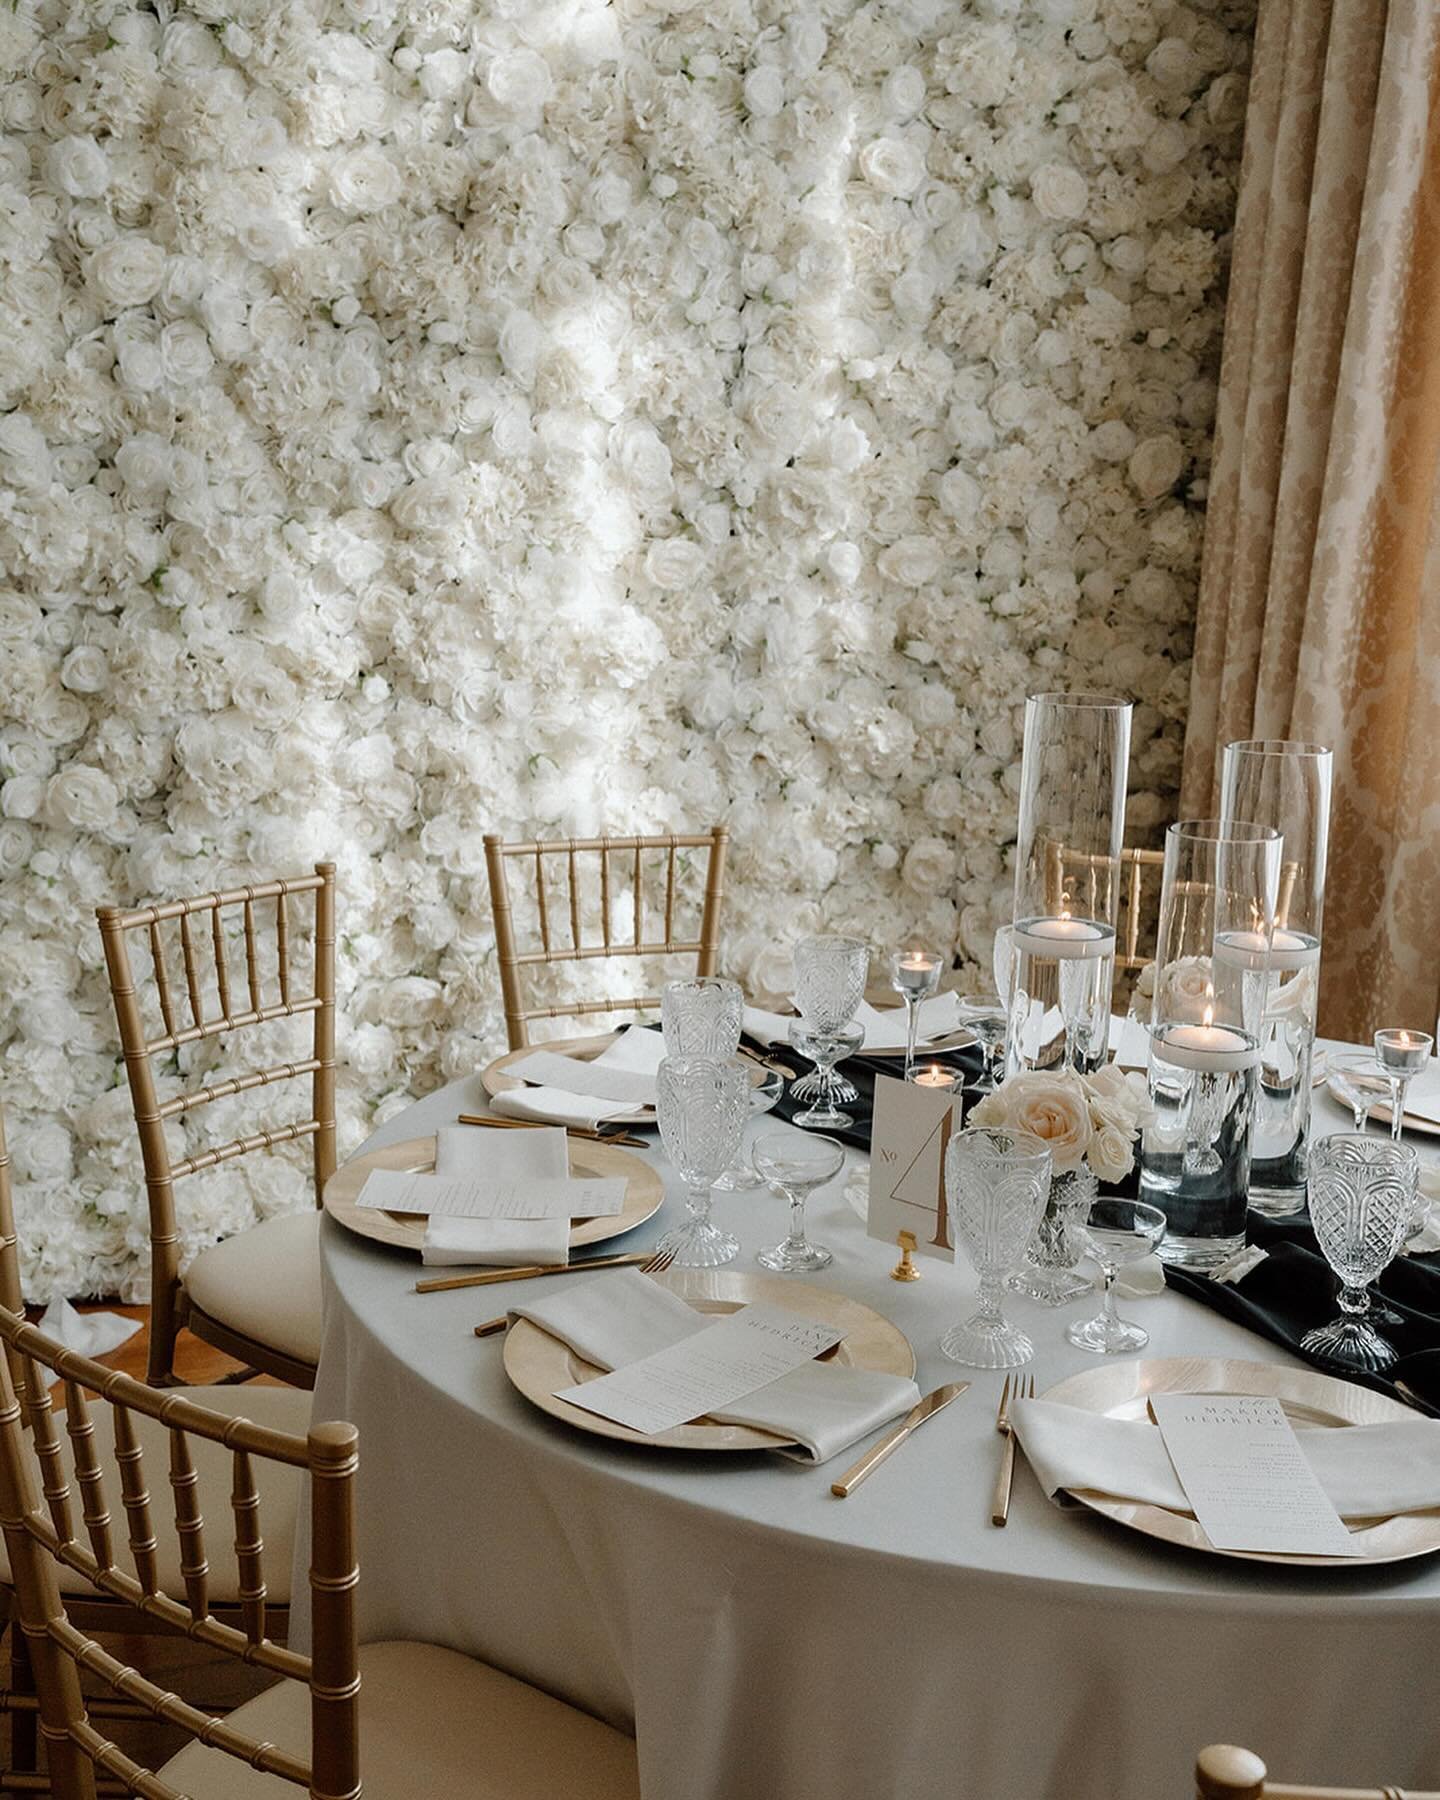 It&rsquo;s all in the little d e t a i l s✨

Design + Decor: @polishedeventsconcord 
Florals: @poppiesfloral 
Photography: @toujoursphoto